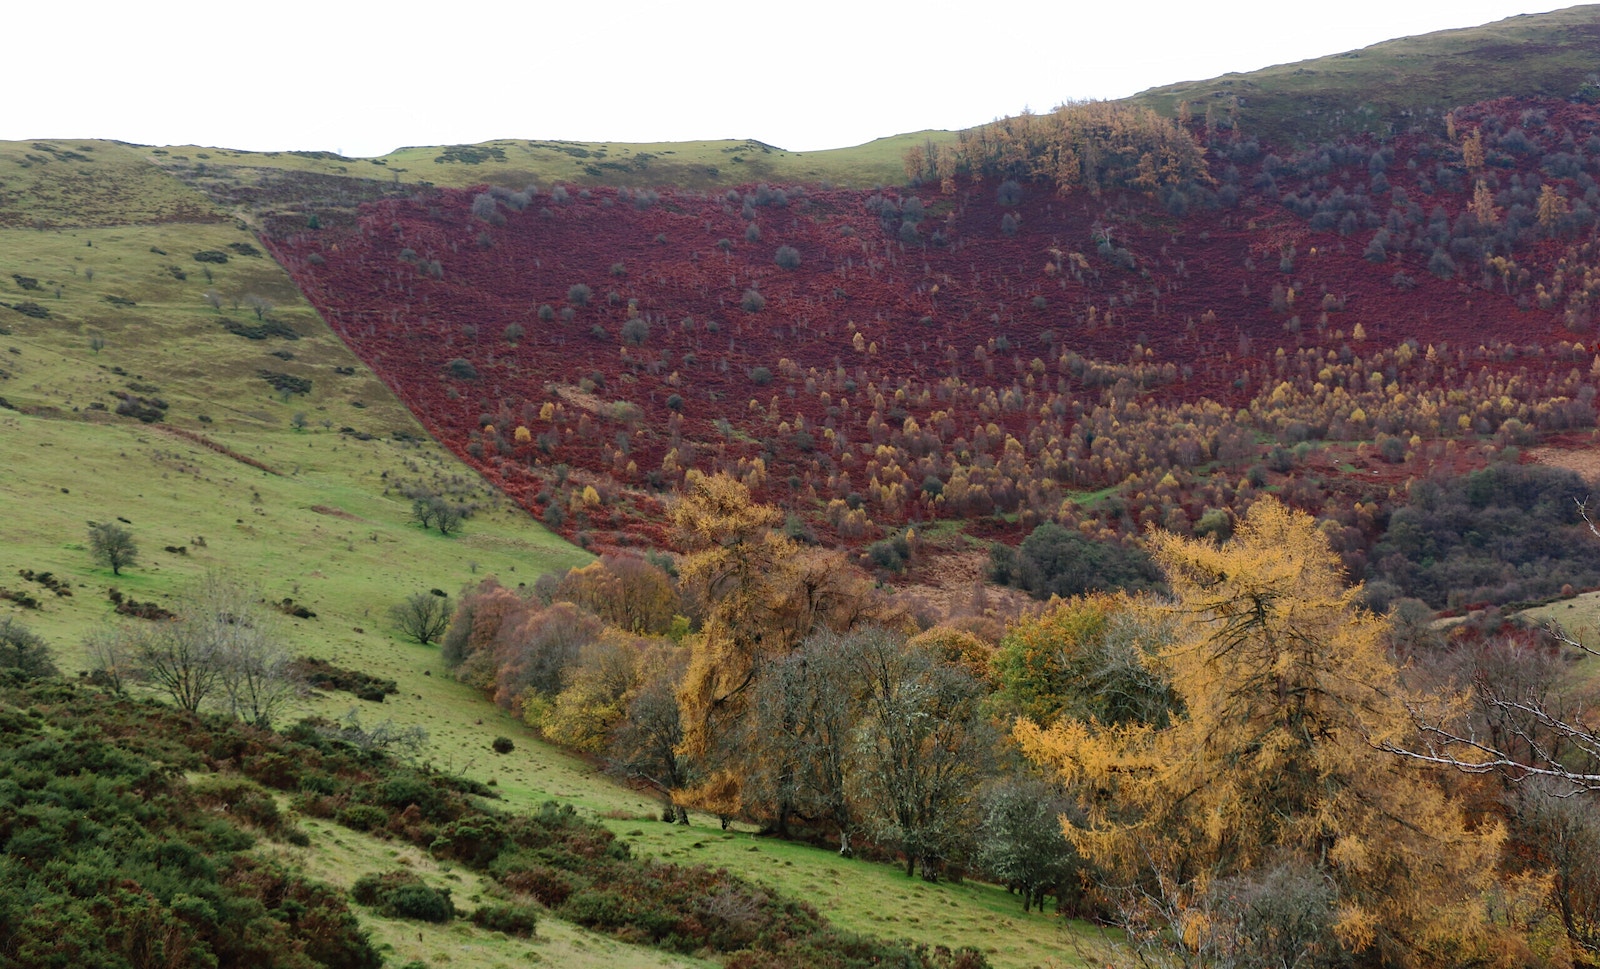 Hillside with visible difference between grazed land and woodland recovery at the border of the reserve